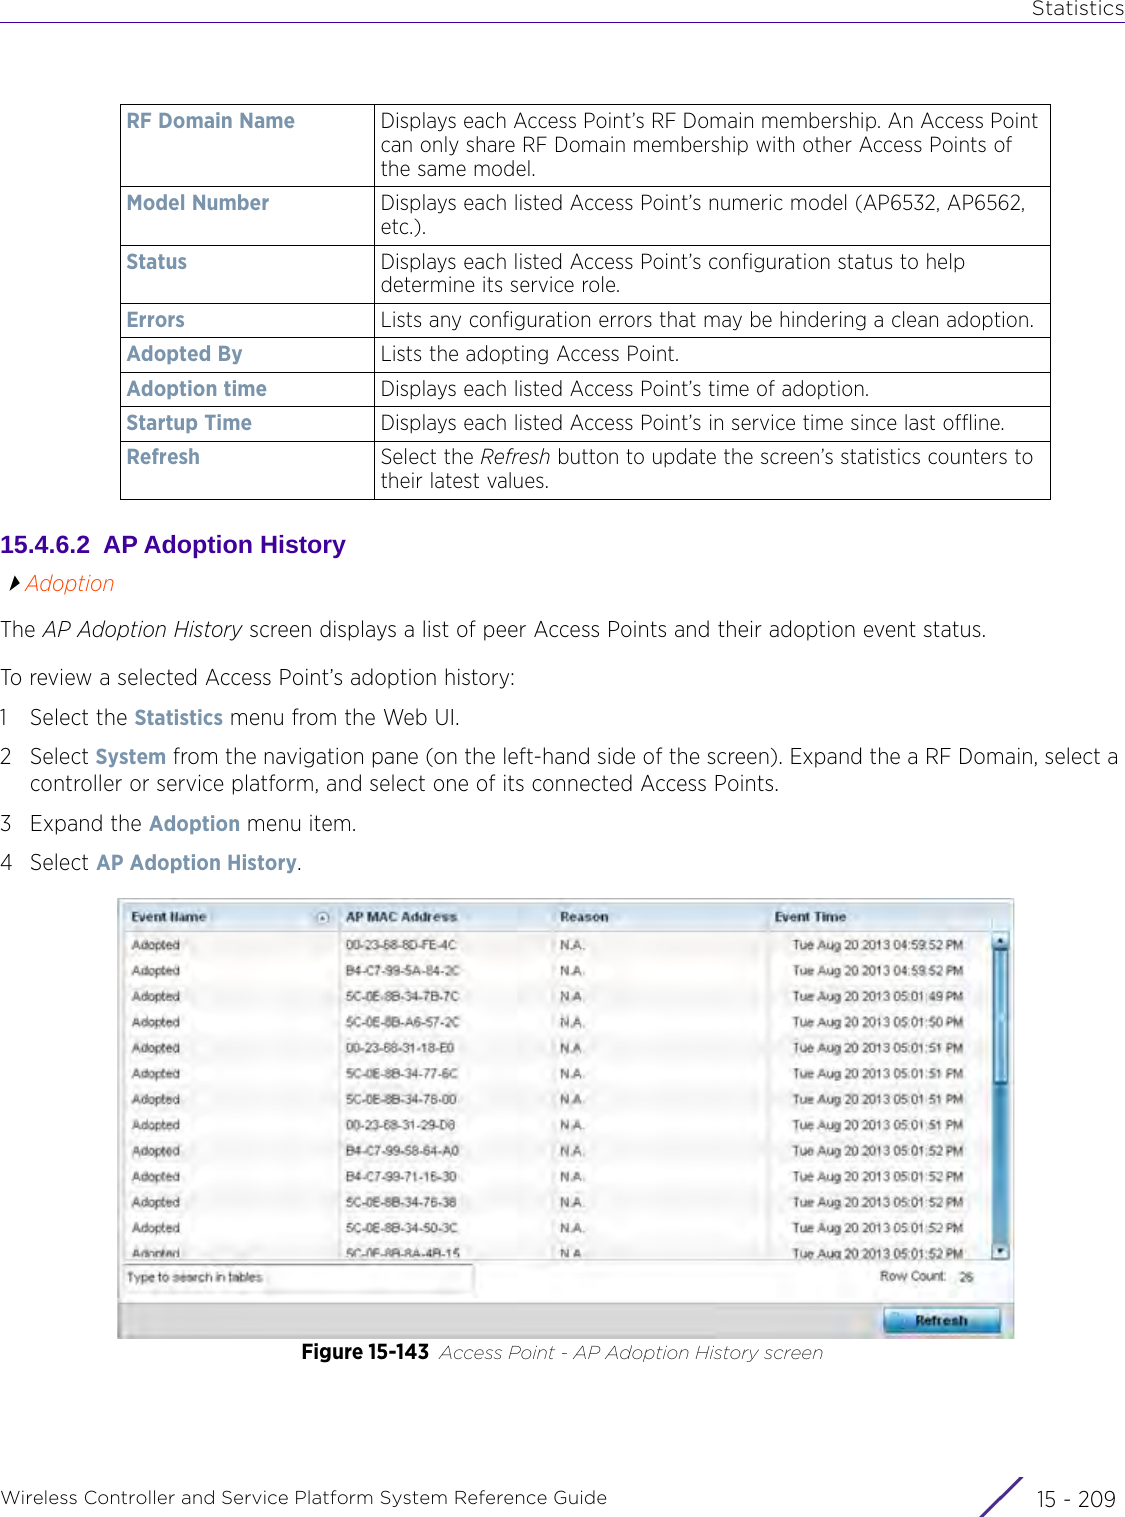 StatisticsWireless Controller and Service Platform System Reference Guide 15 - 20915.4.6.2  AP Adoption HistoryAdoptionThe AP Adoption History screen displays a list of peer Access Points and their adoption event status.To review a selected Access Point’s adoption history:1 Select the Statistics menu from the Web UI.2Select System from the navigation pane (on the left-hand side of the screen). Expand the a RF Domain, select a controller or service platform, and select one of its connected Access Points. 3Expand the Adoption menu item.4Select AP Adoption History.Figure 15-143 Access Point - AP Adoption History screenRF Domain Name Displays each Access Point’s RF Domain membership. An Access Point can only share RF Domain membership with other Access Points of the same model.Model Number Displays each listed Access Point’s numeric model (AP6532, AP6562,  etc.).Status Displays each listed Access Point’s configuration status to help determine its service role.Errors Lists any configuration errors that may be hindering a clean adoption.Adopted By Lists the adopting Access Point.Adoption time Displays each listed Access Point’s time of adoption.Startup Time Displays each listed Access Point’s in service time since last offline.Refresh Select the Refresh button to update the screen’s statistics counters to their latest values.